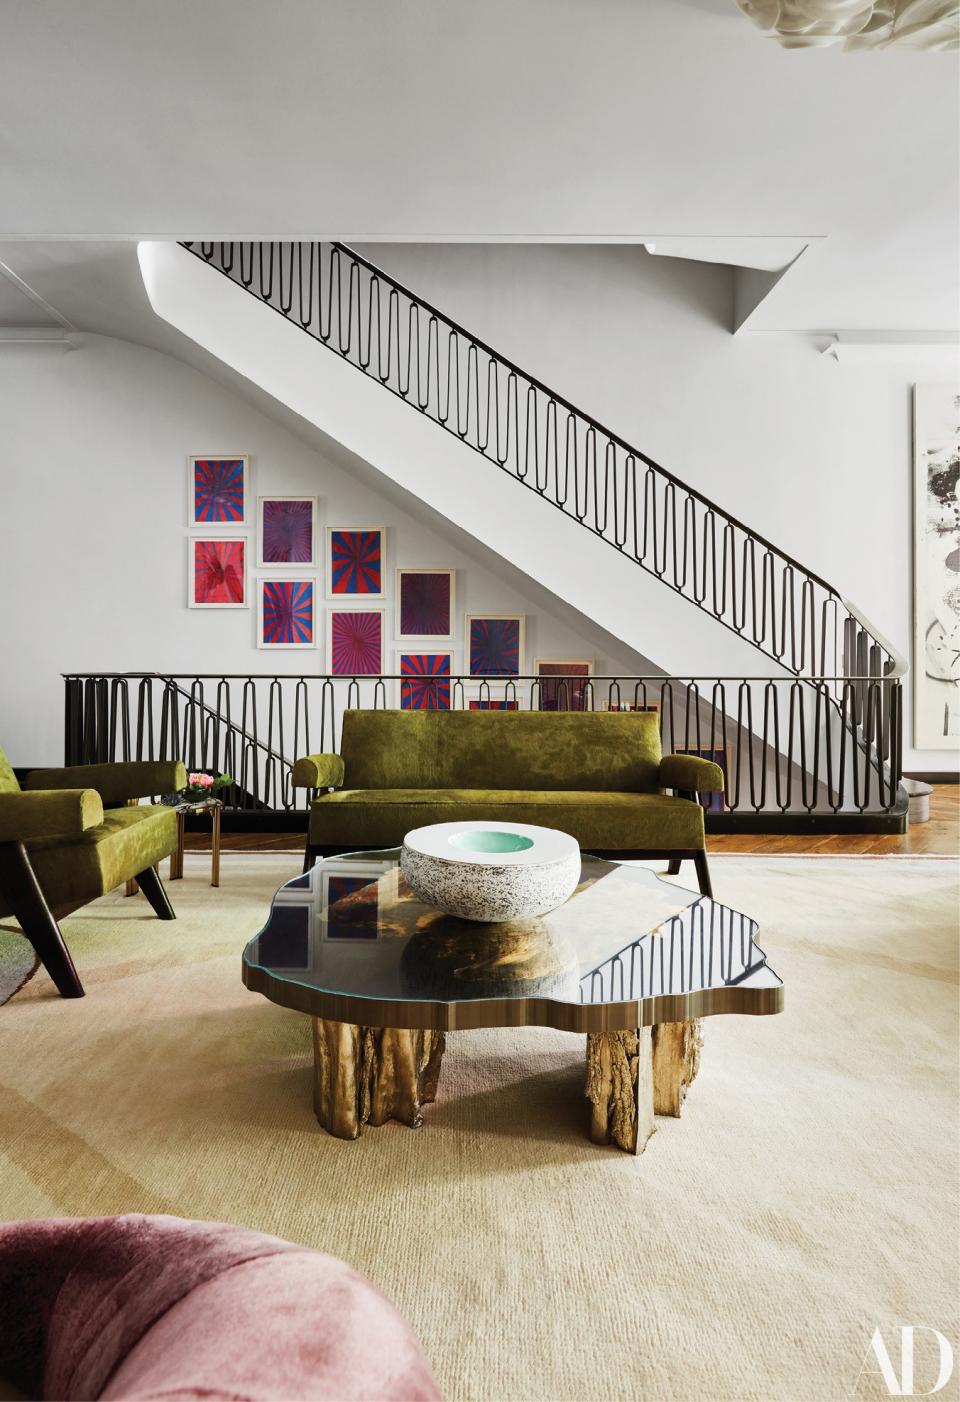 In the living room, a settee and a pair of chairs by Pierre Jeanneret surround a cocktail table by Maria Pergay. Artwork by Mark Grotjahn lines the staircase.